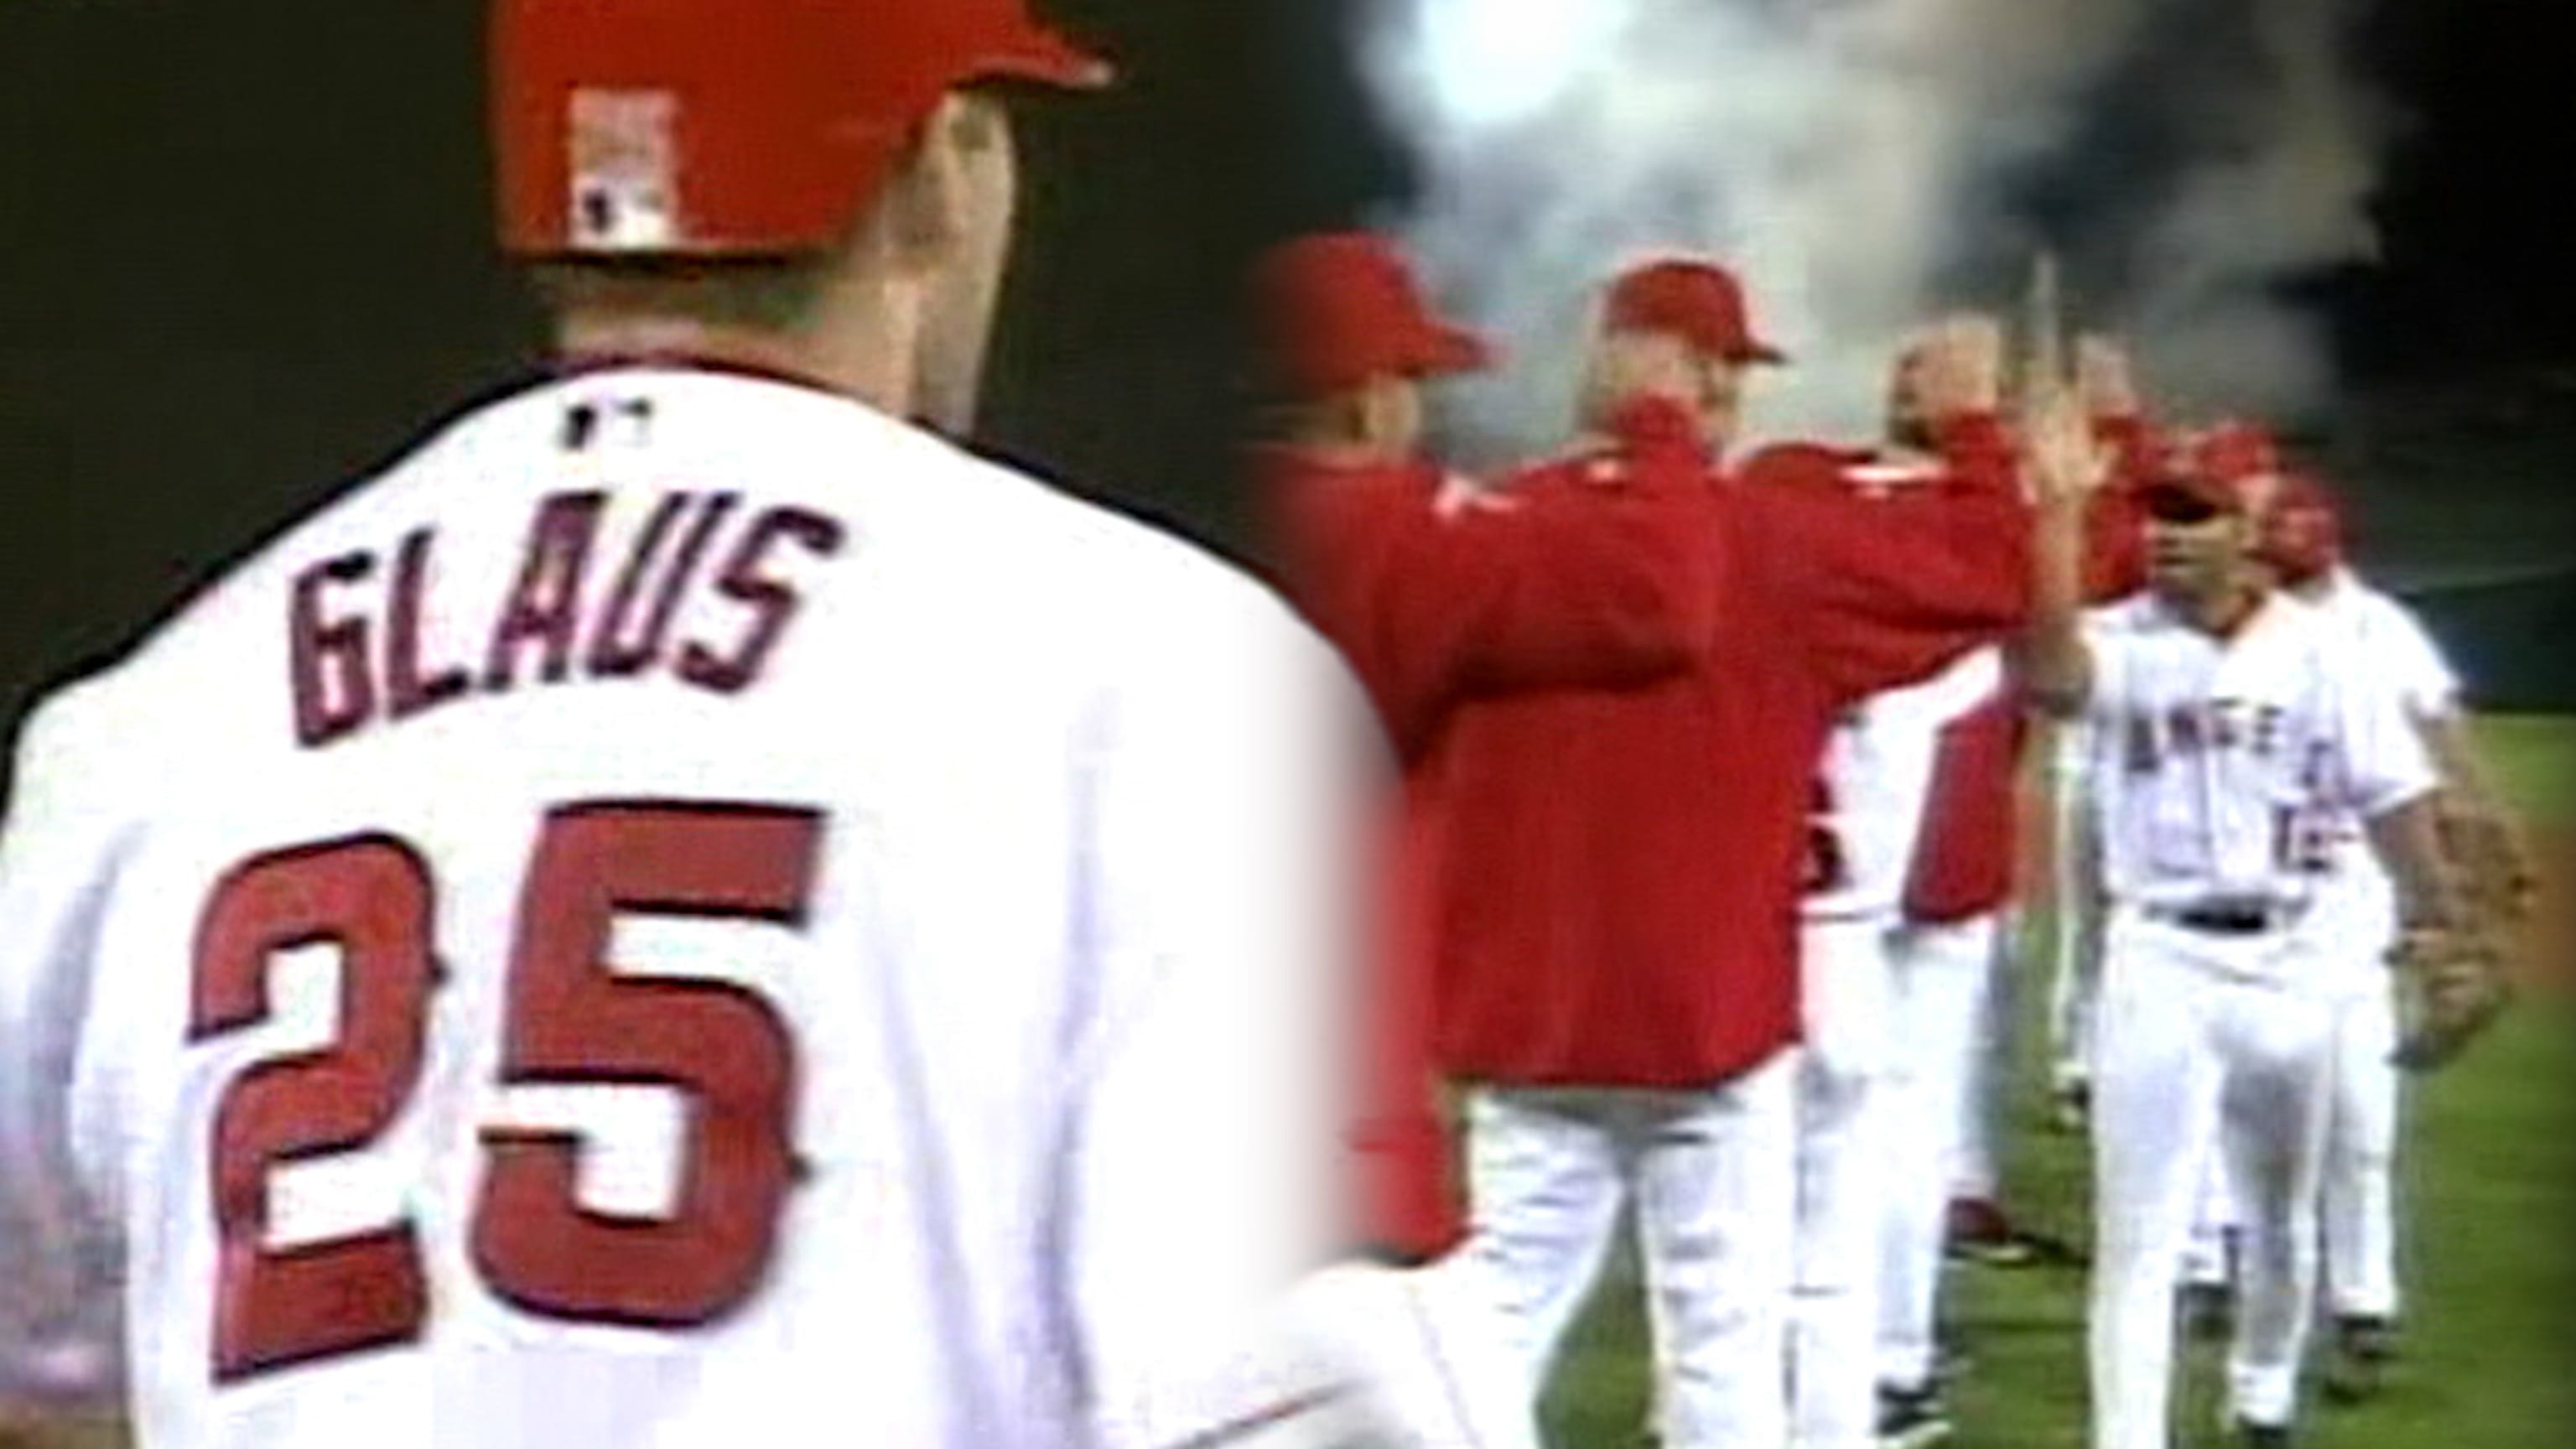 Top 10 Moments in Angels History: Anaheim Angels are champions of baseball